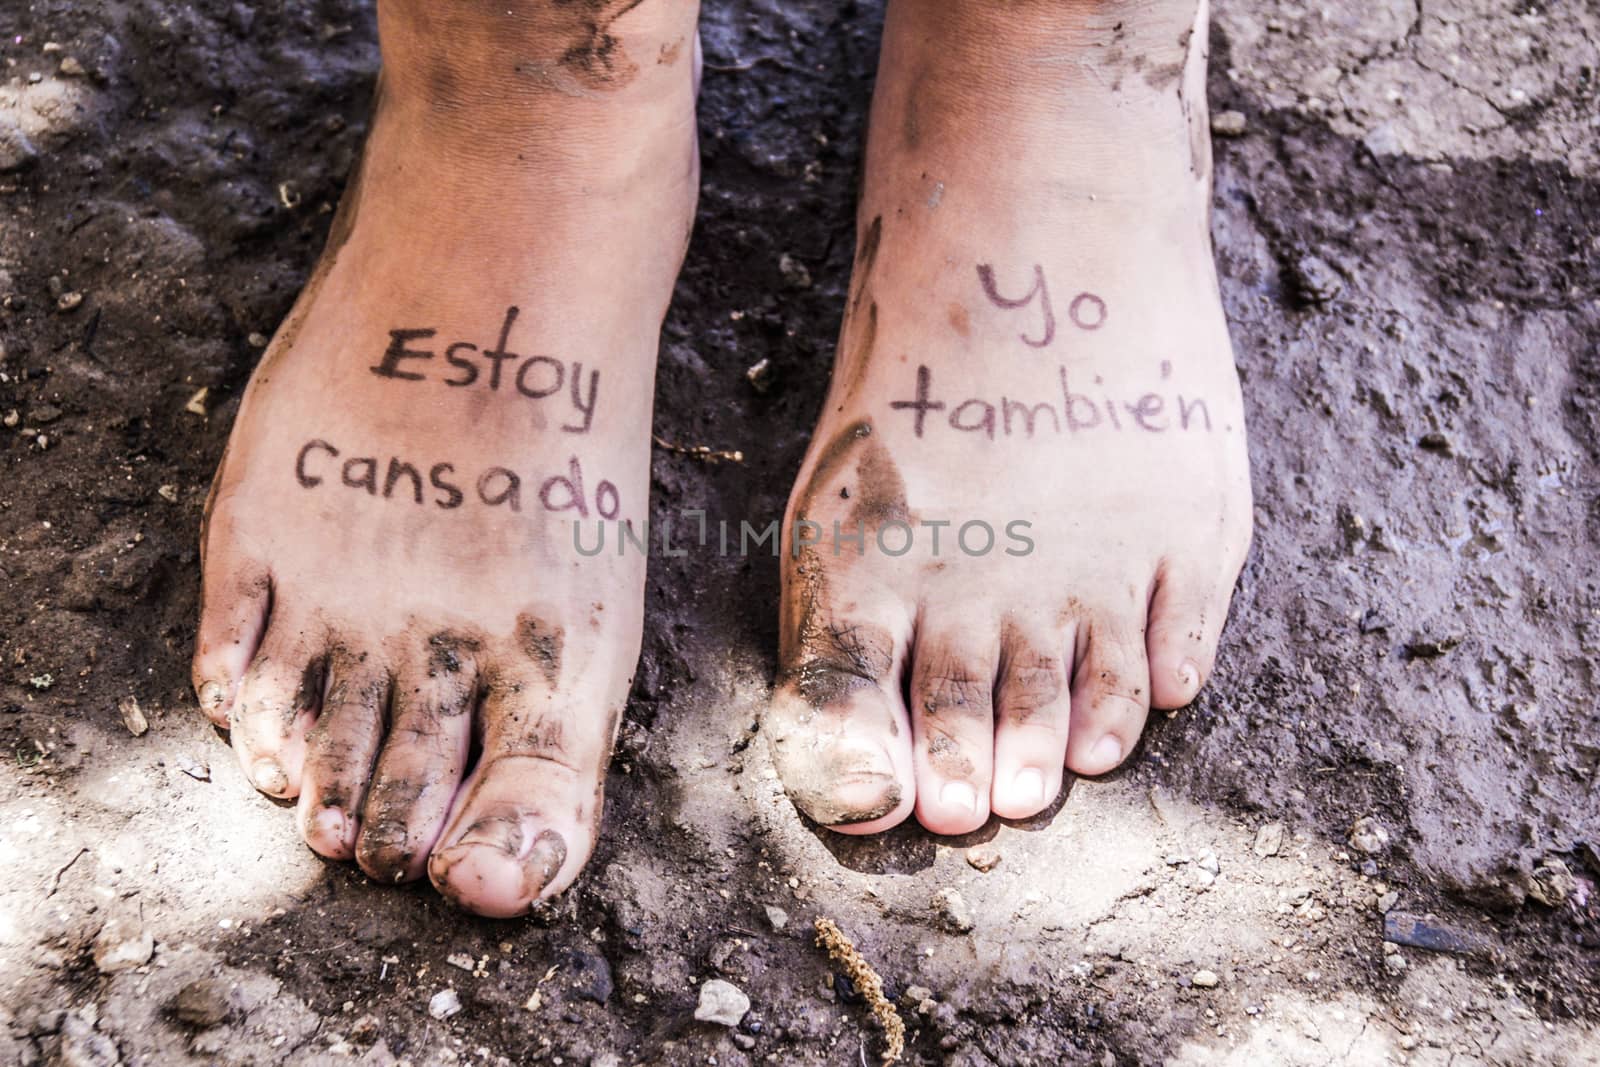 Photograph of a pair of human feet and the phrase in spanish: Estoy cansado, yo tambien, which means: Im tired, me too